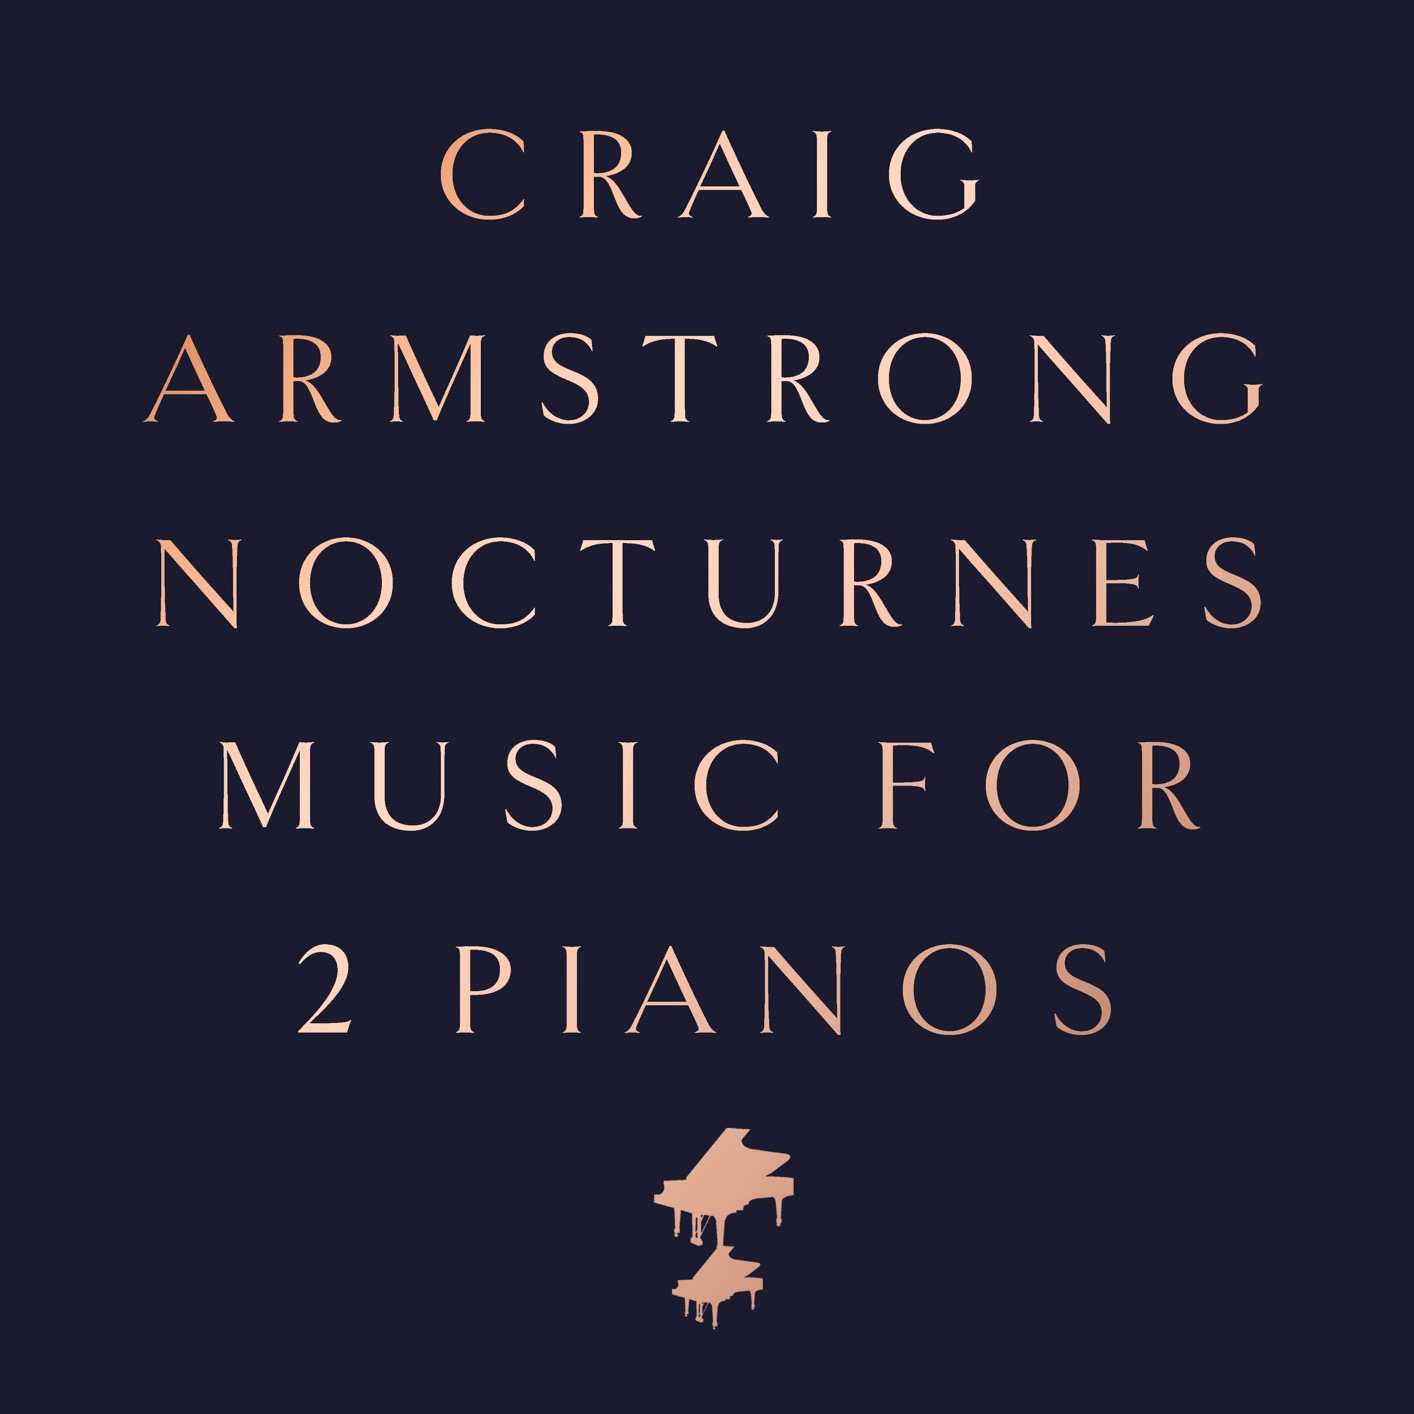 Craig Armstrong - Nocturnes: Music for 2 Pianos (2021) [FLAC 24bit/48kHz]